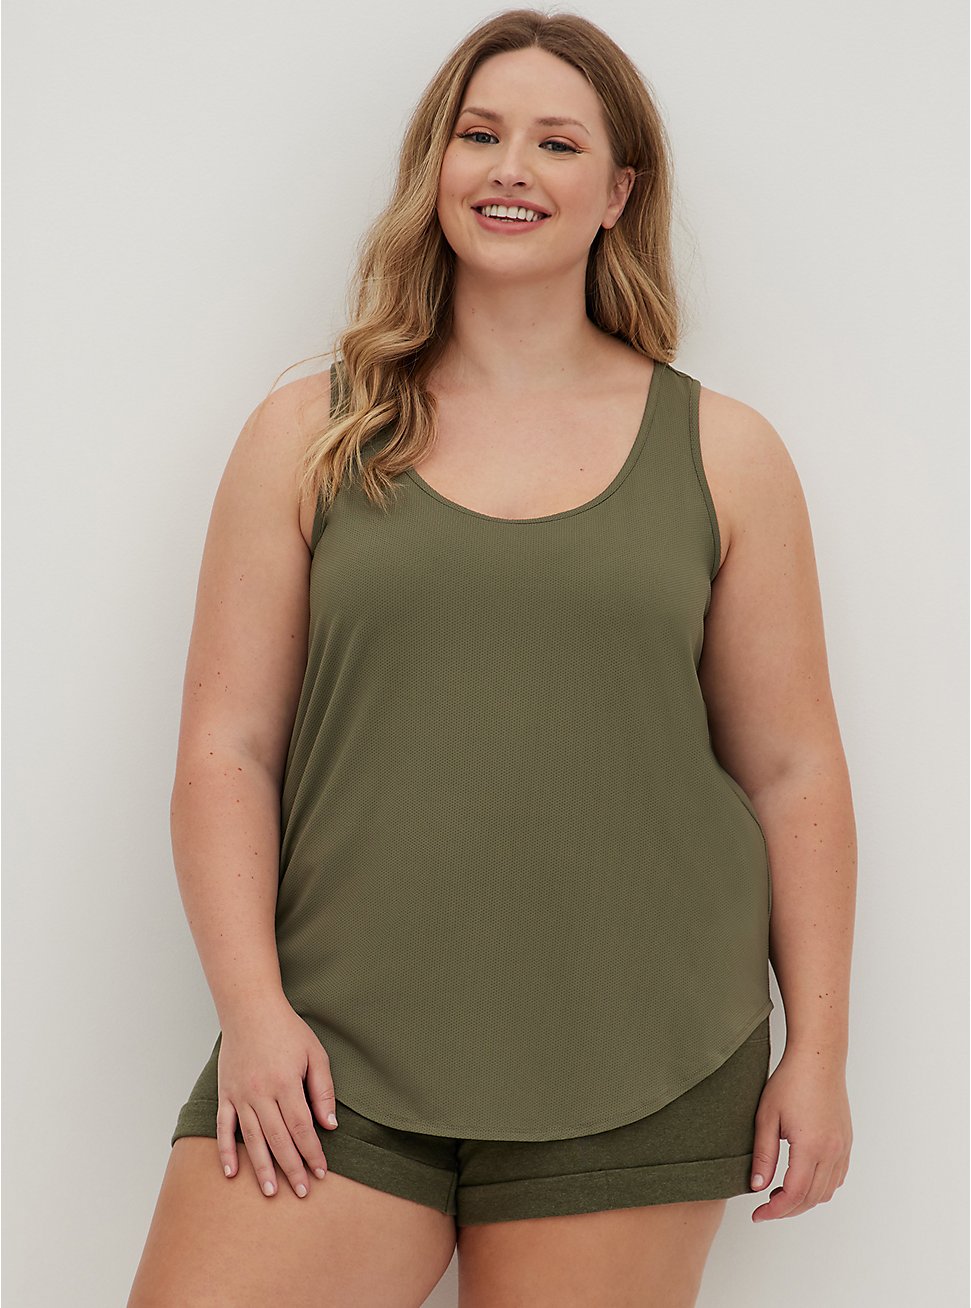 Perforated Active Tank - Olive, DUSTY OLIVE, hi-res